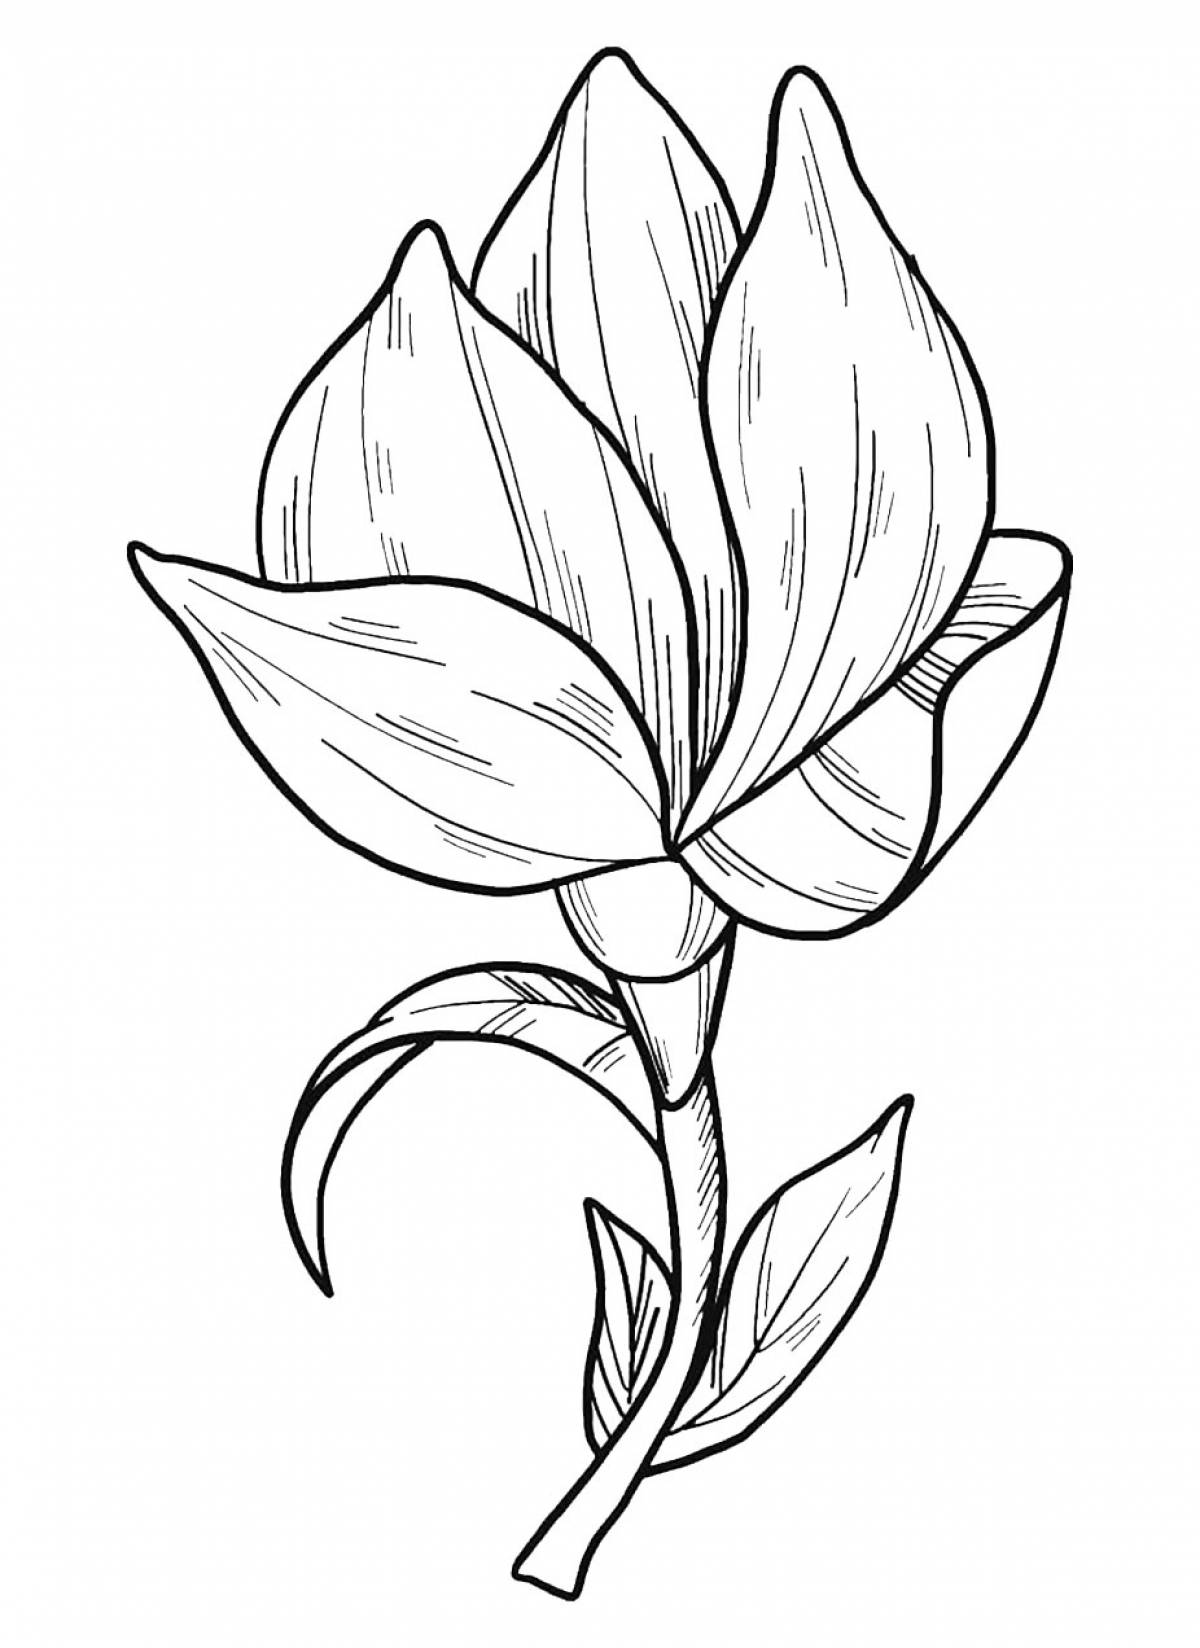 Fine stone flower coloring pages for kids